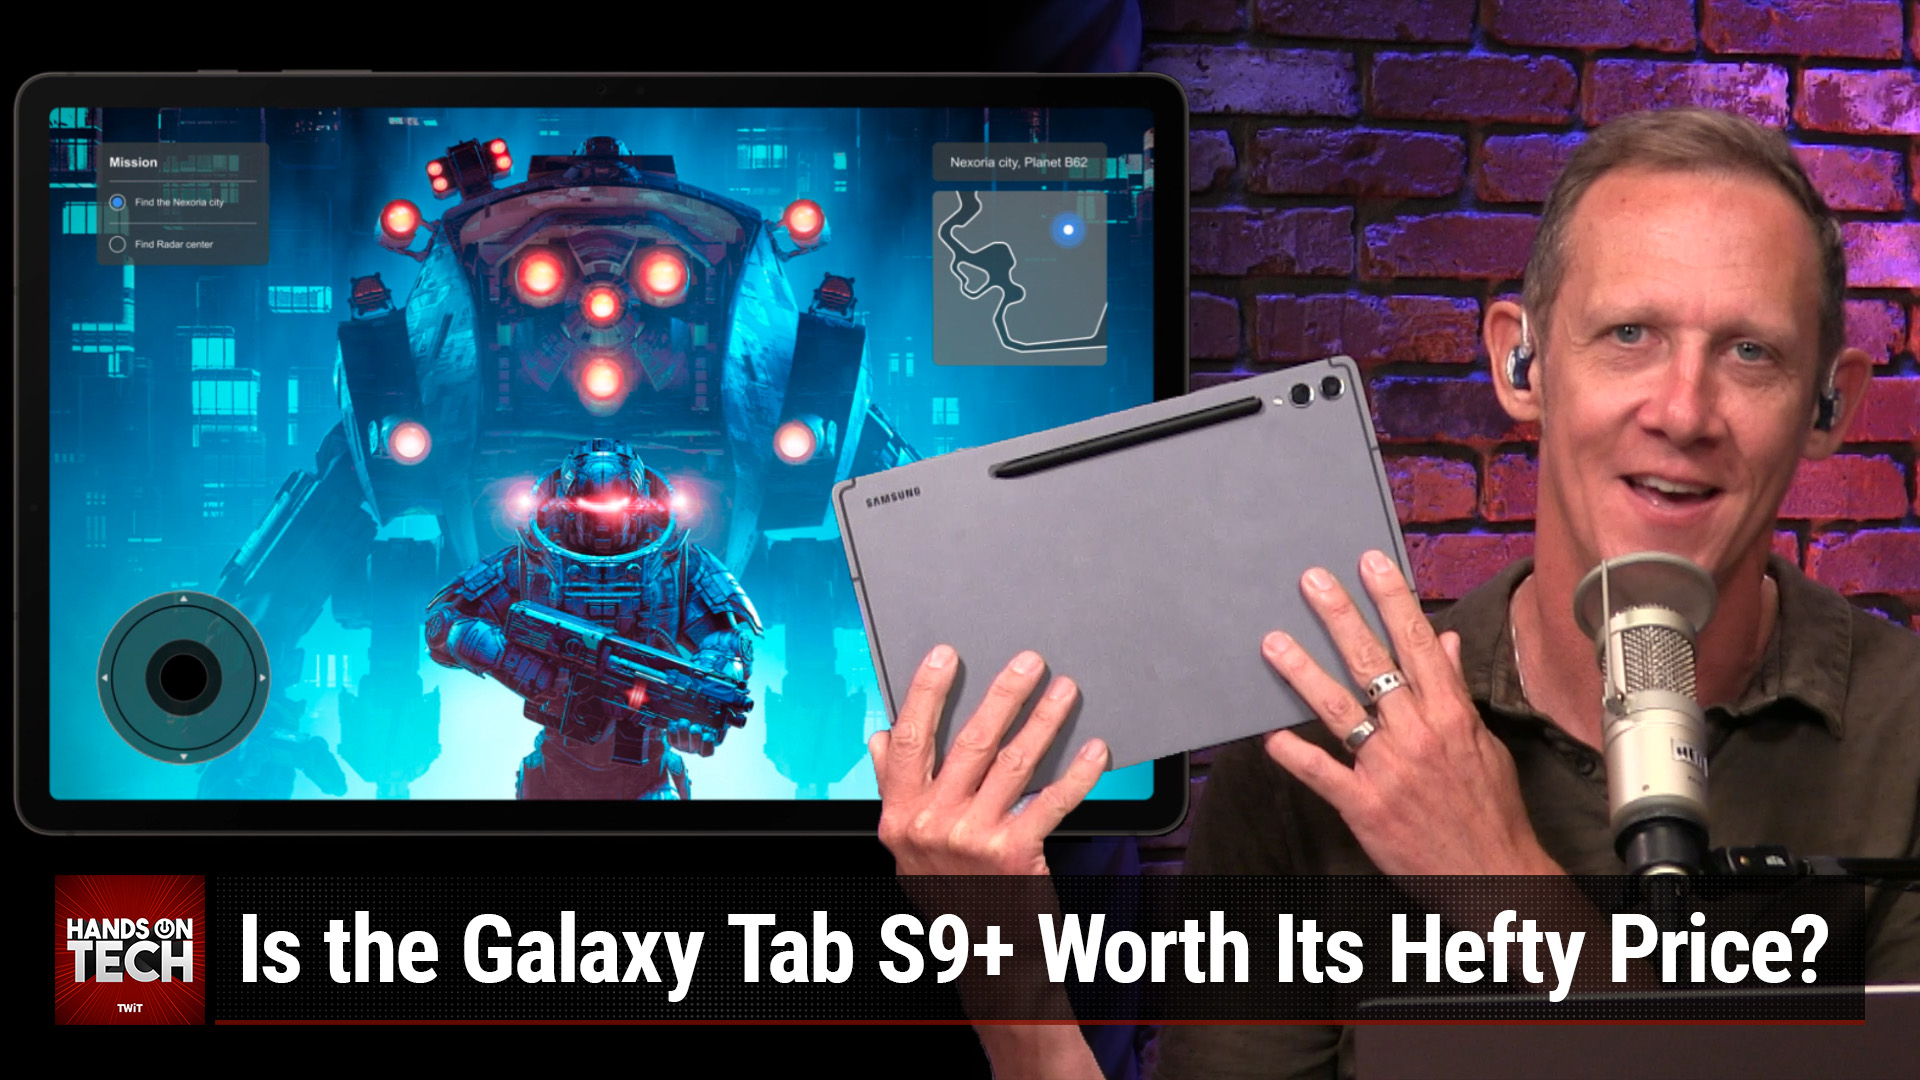 Samsung Galaxy Tab S7 Android Tablet Review: Great, but Buy an iPad